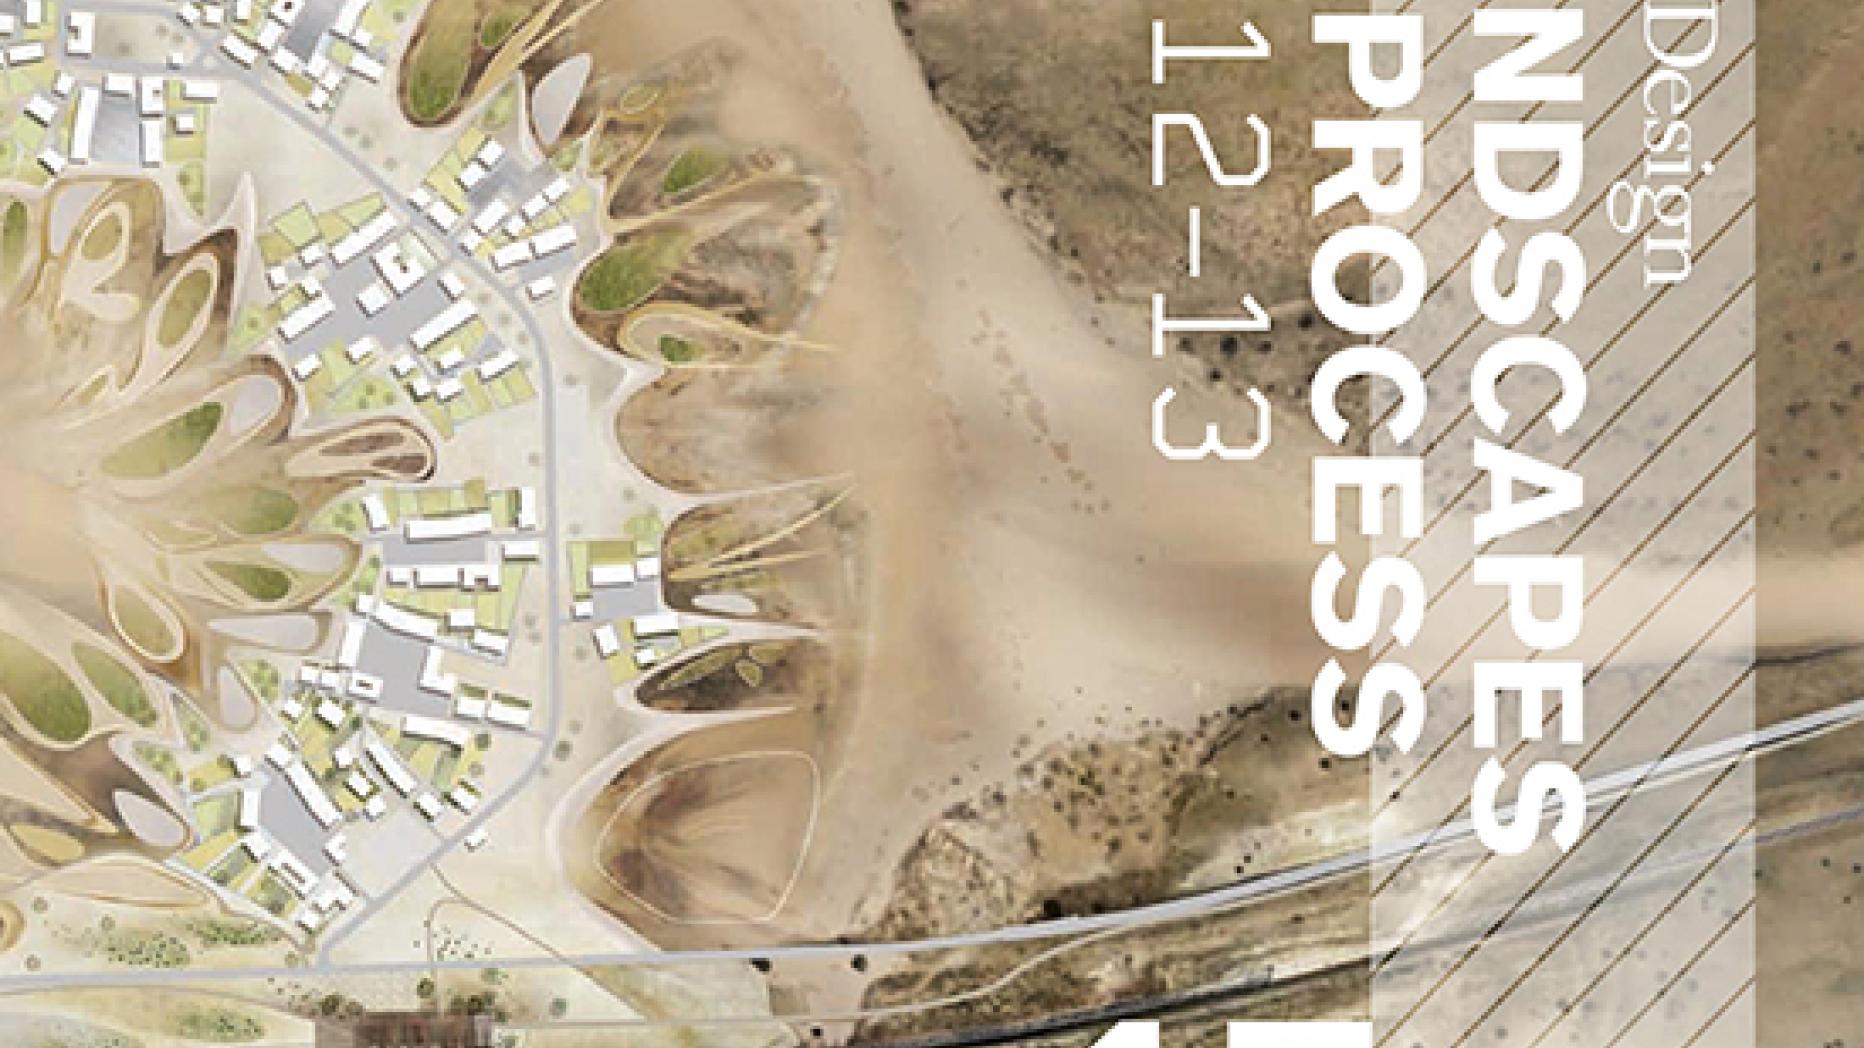 Cover for publication, "Landscapes in Process" edition 17, 2012-13